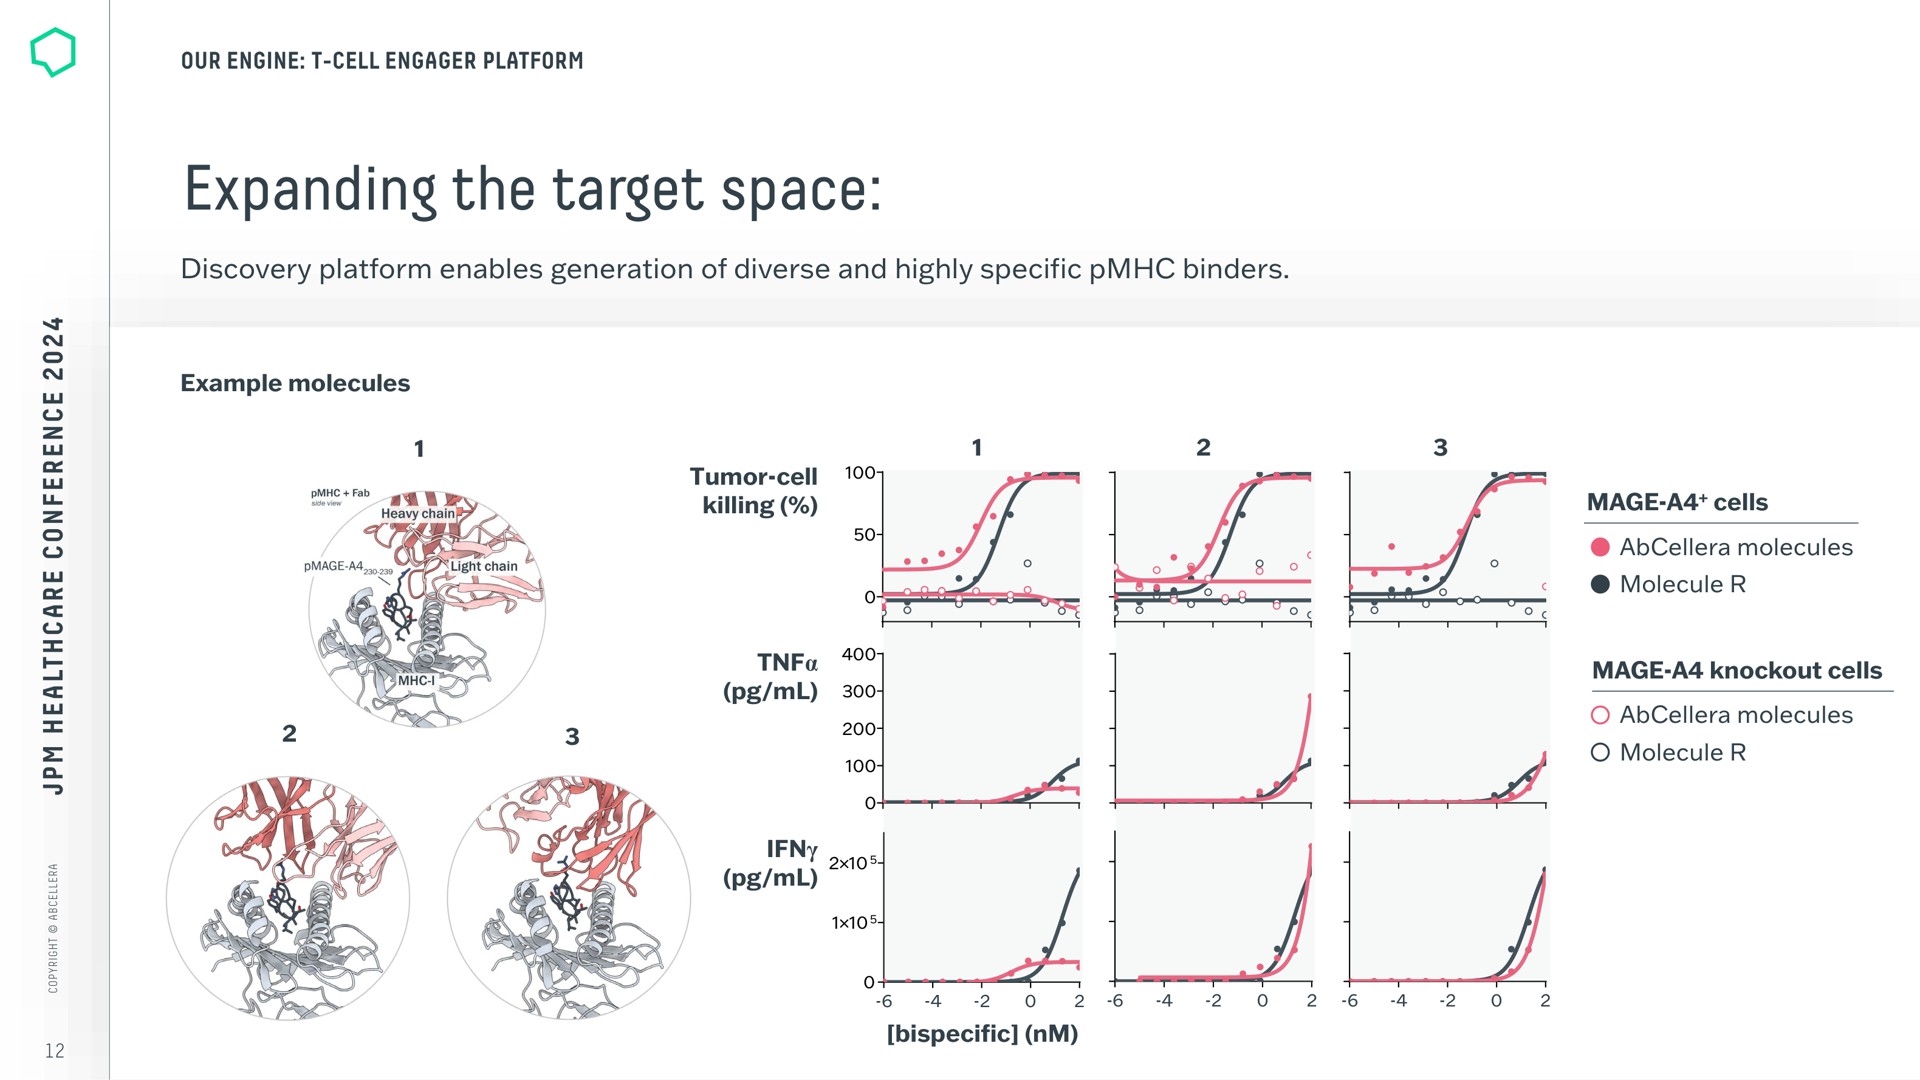 expanding the target space discovery platform enables generation of diverse and highly specific binders a | AbCellera